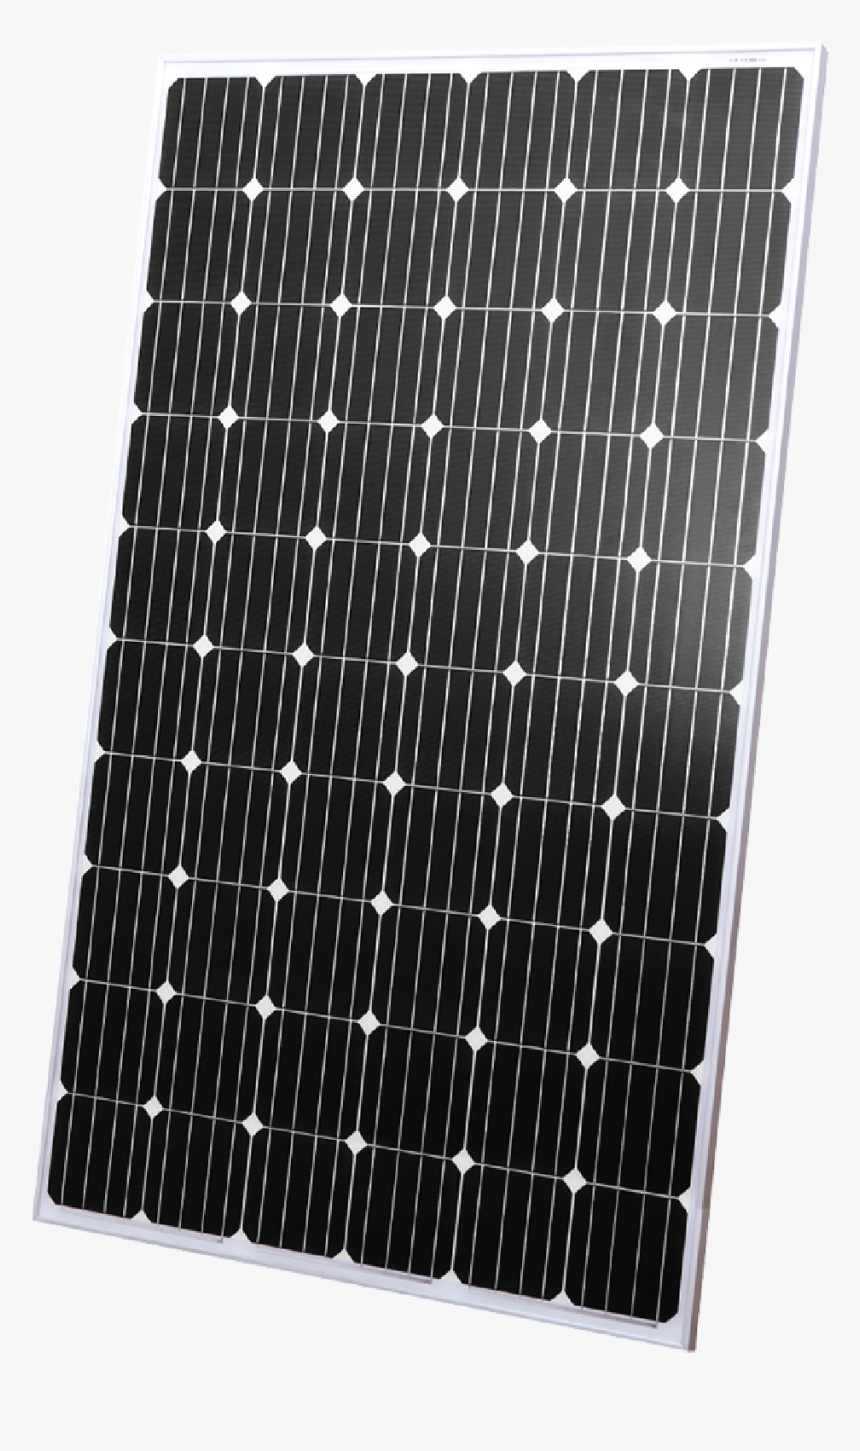 Mono Crystal Solar Cell, HD Png Download, Free Download